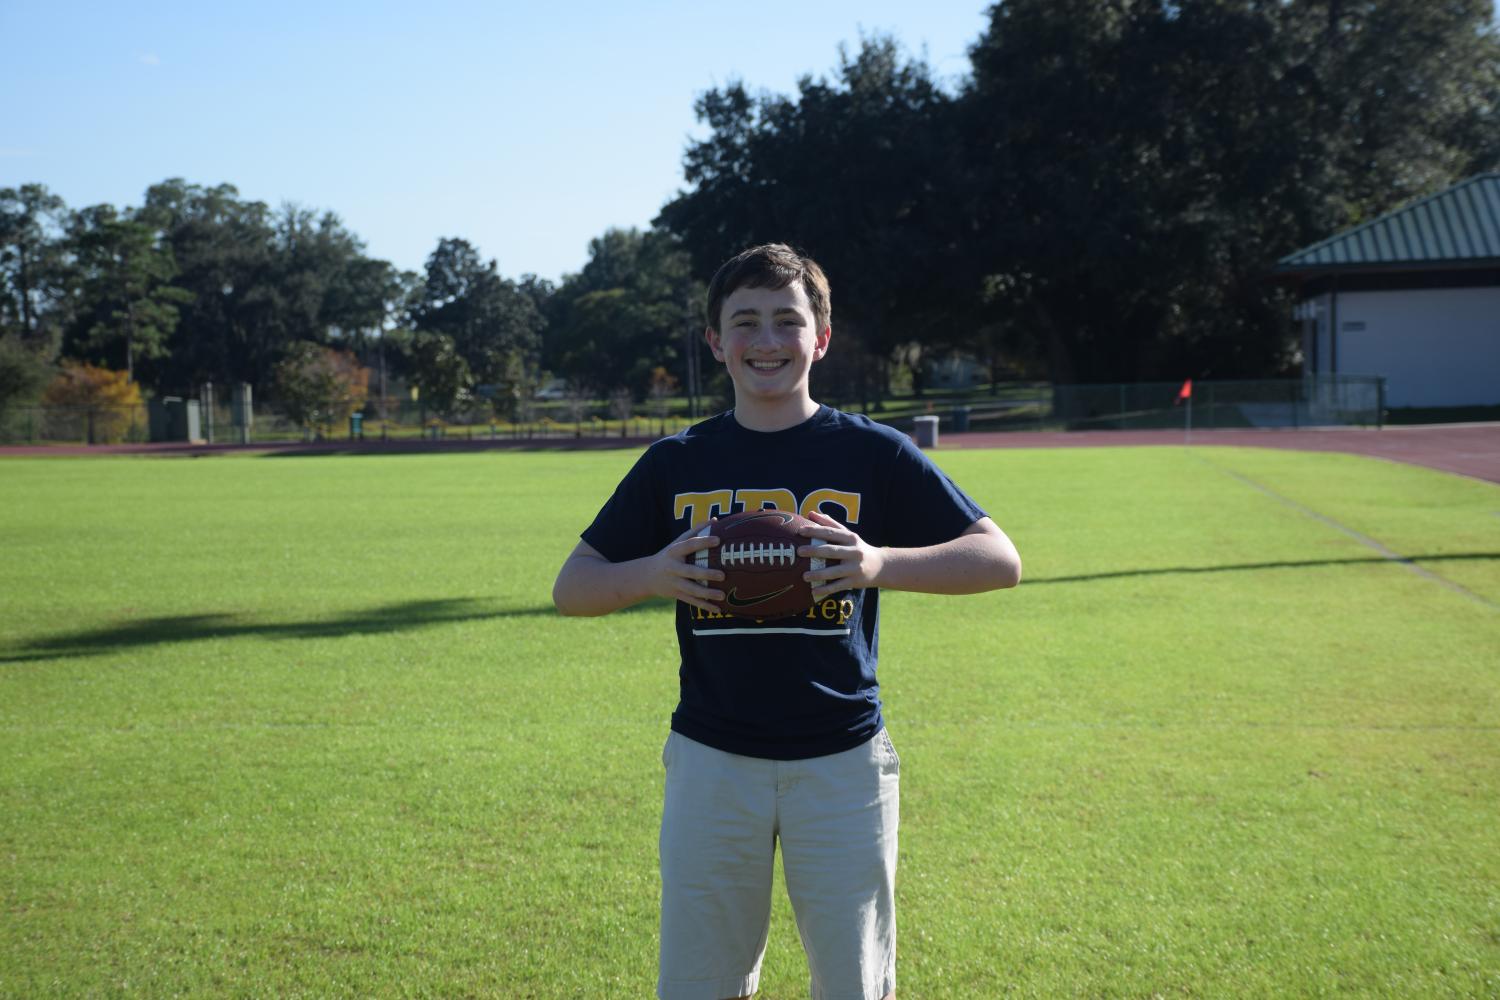 Incoming seventh grader makes his mark on the school